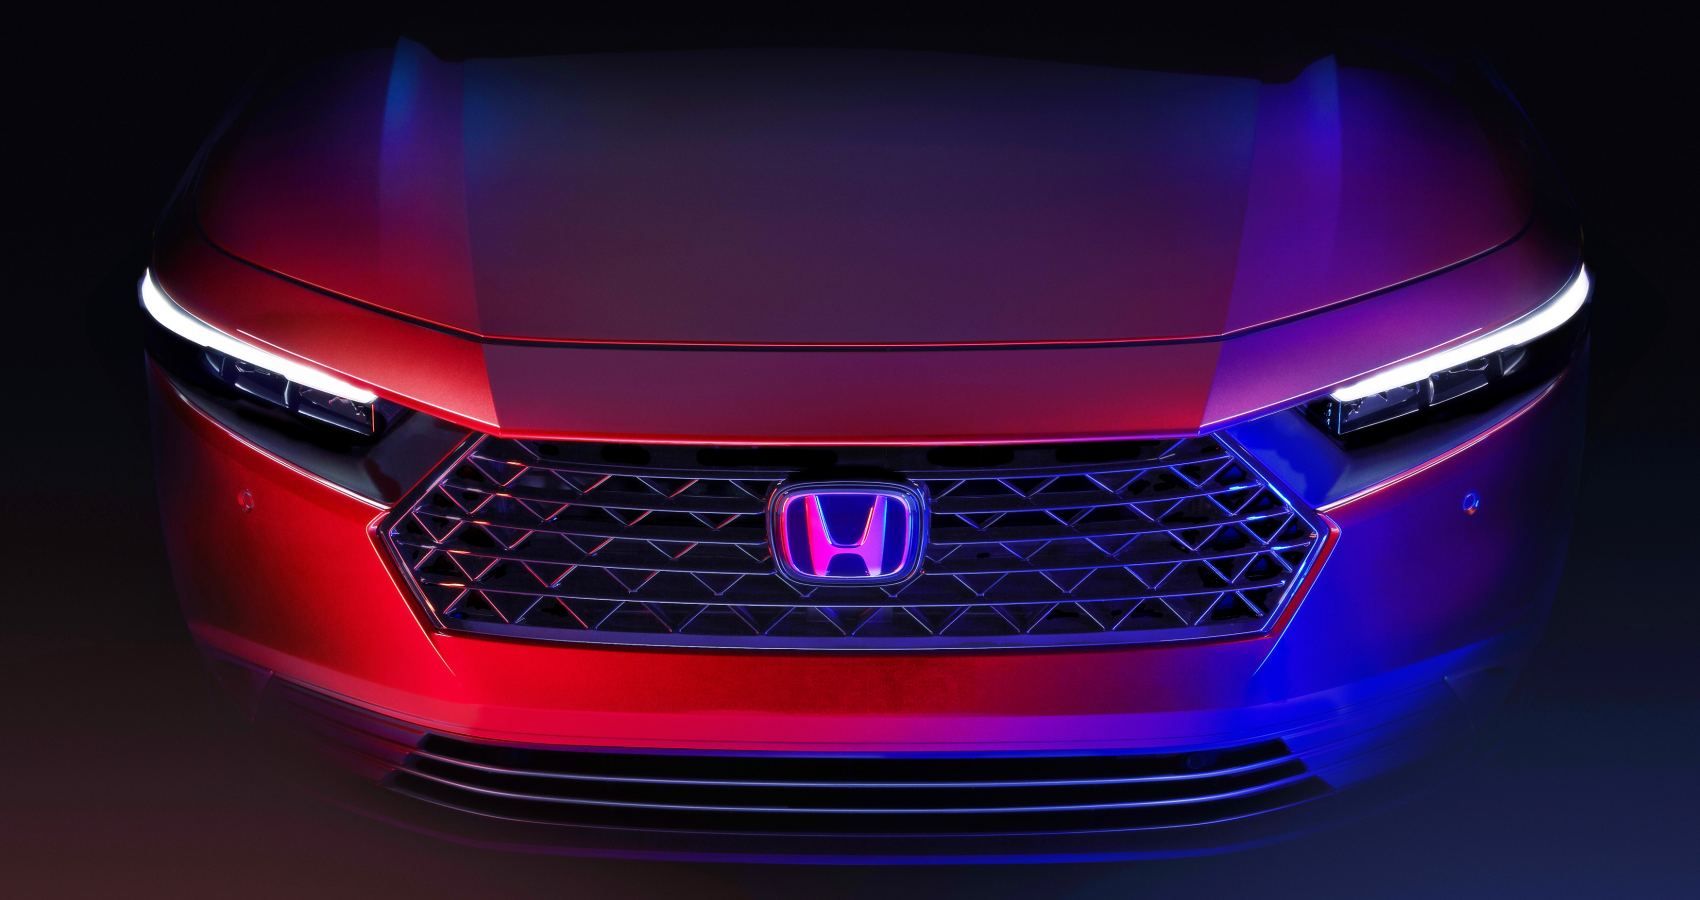 2023 Honda Accord Teaser front Featured